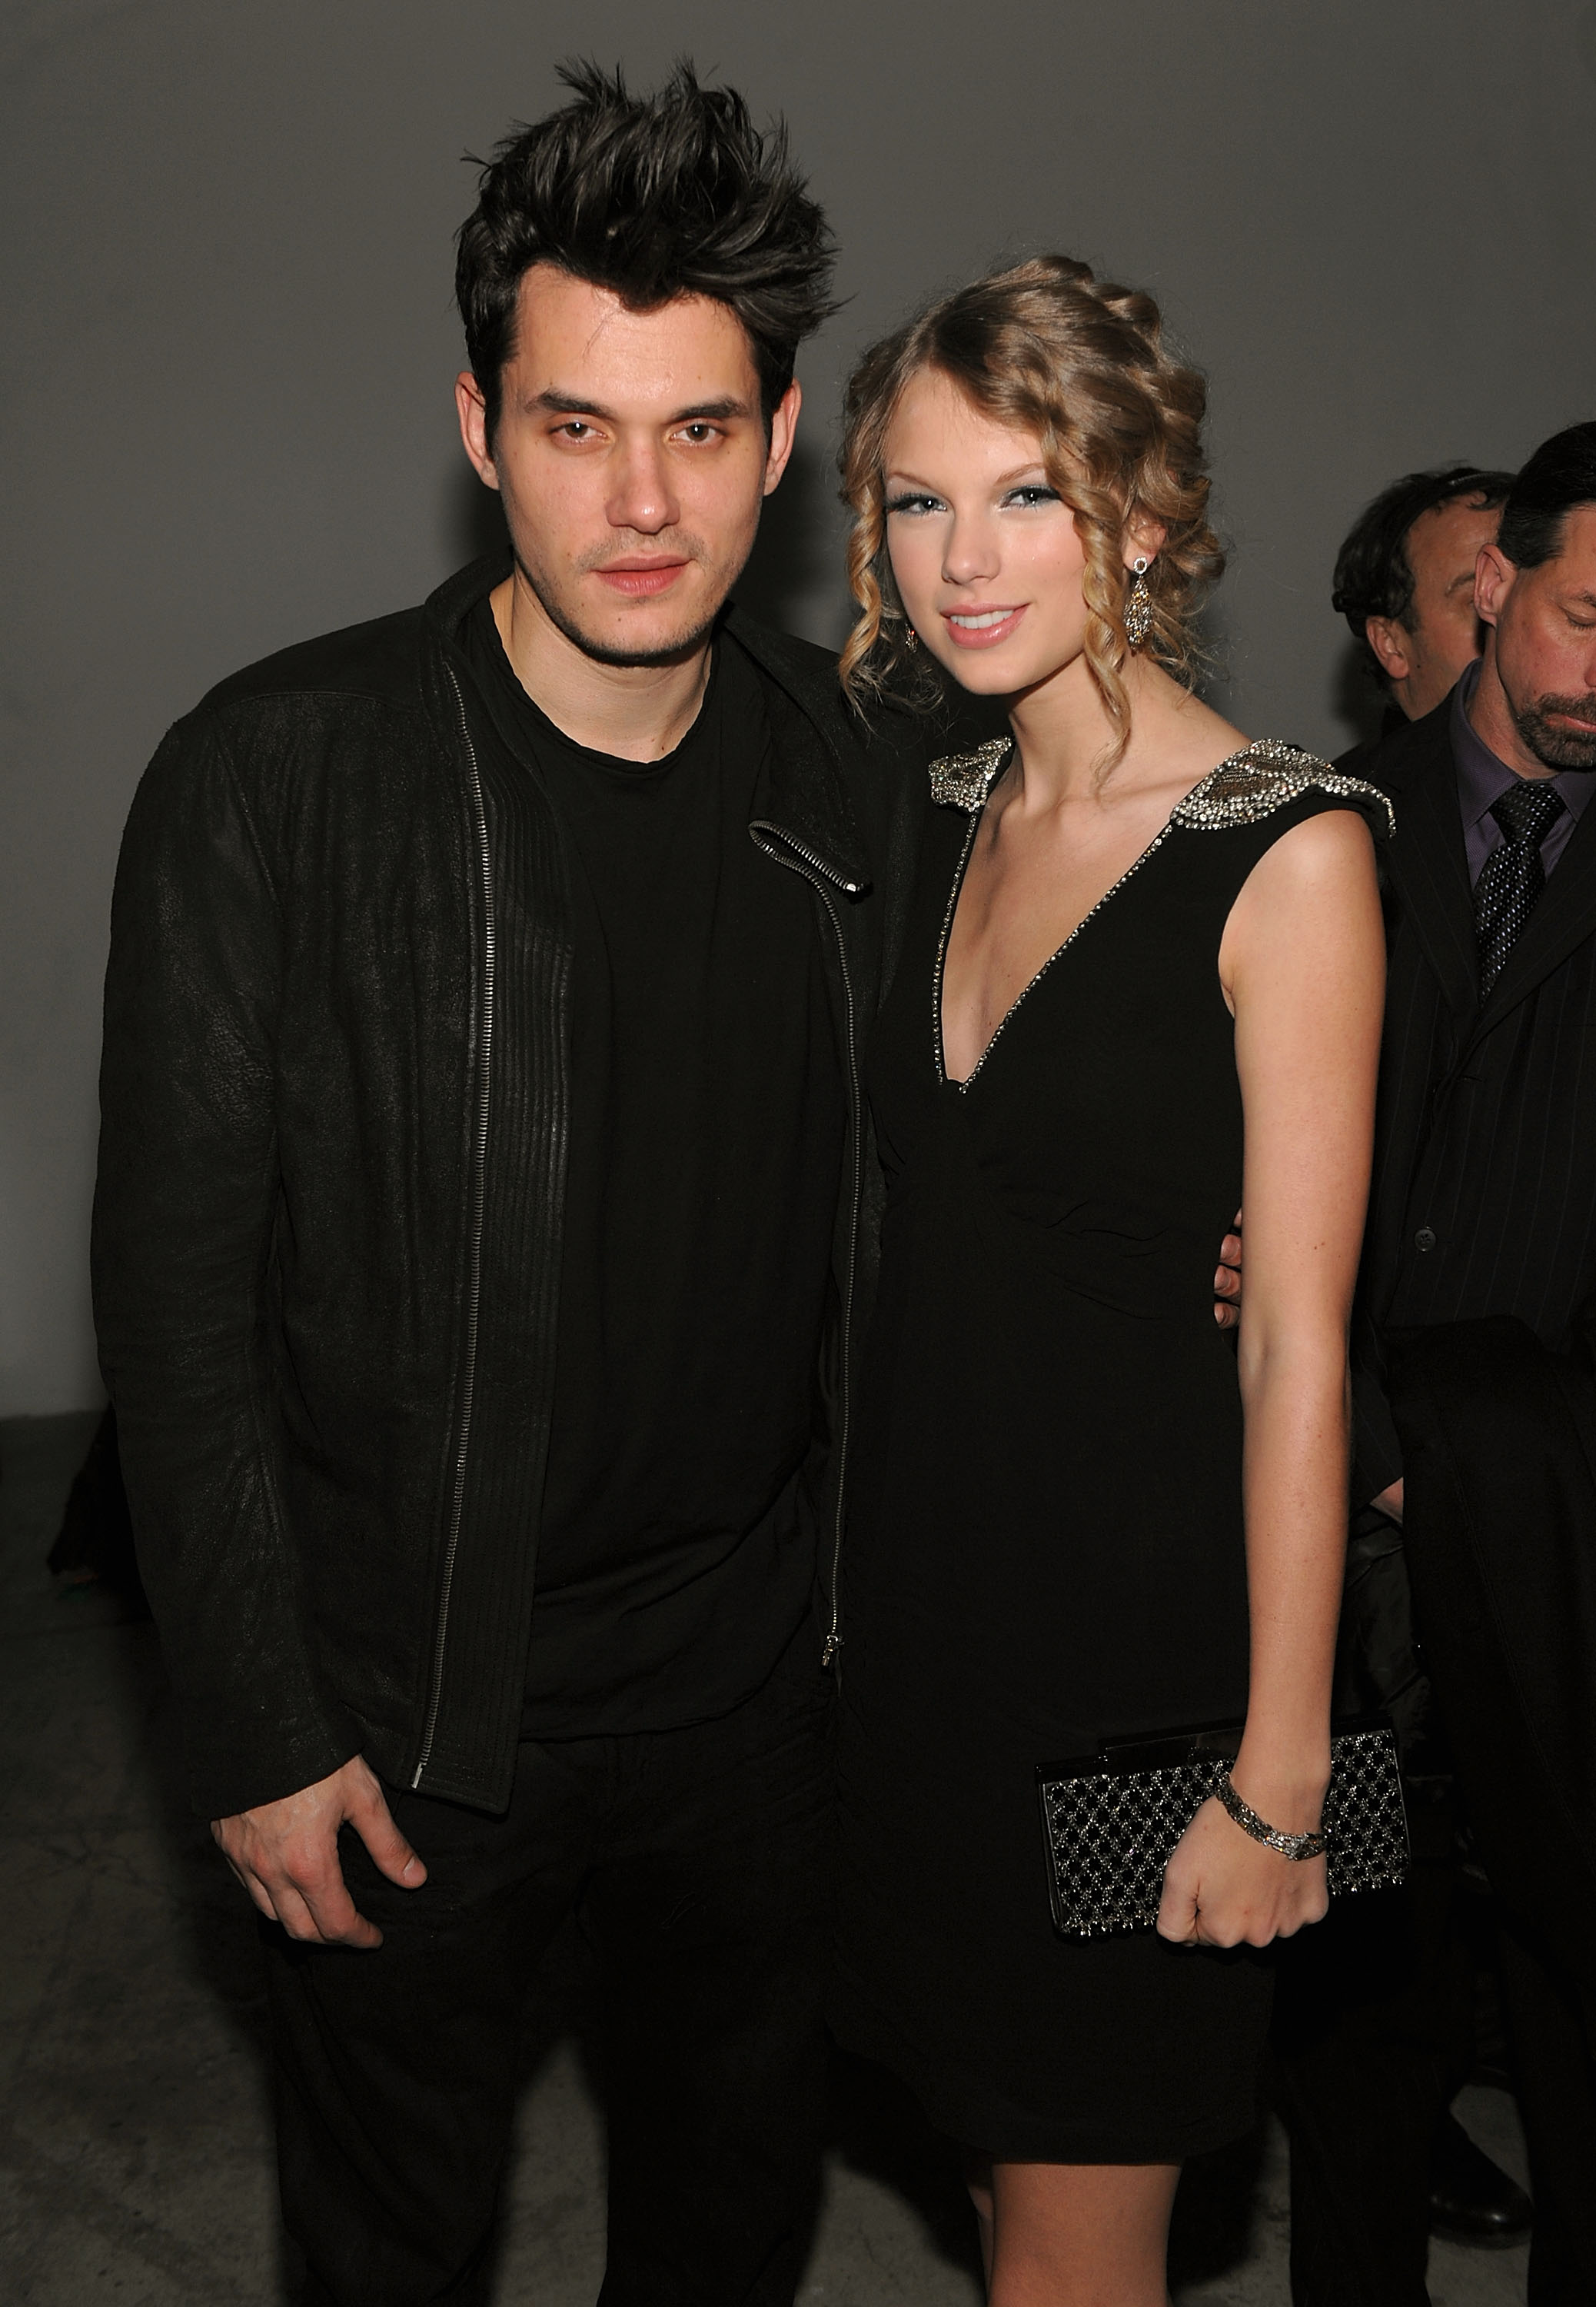  Taylor Swift is thought to have slammed John Mayer in her music